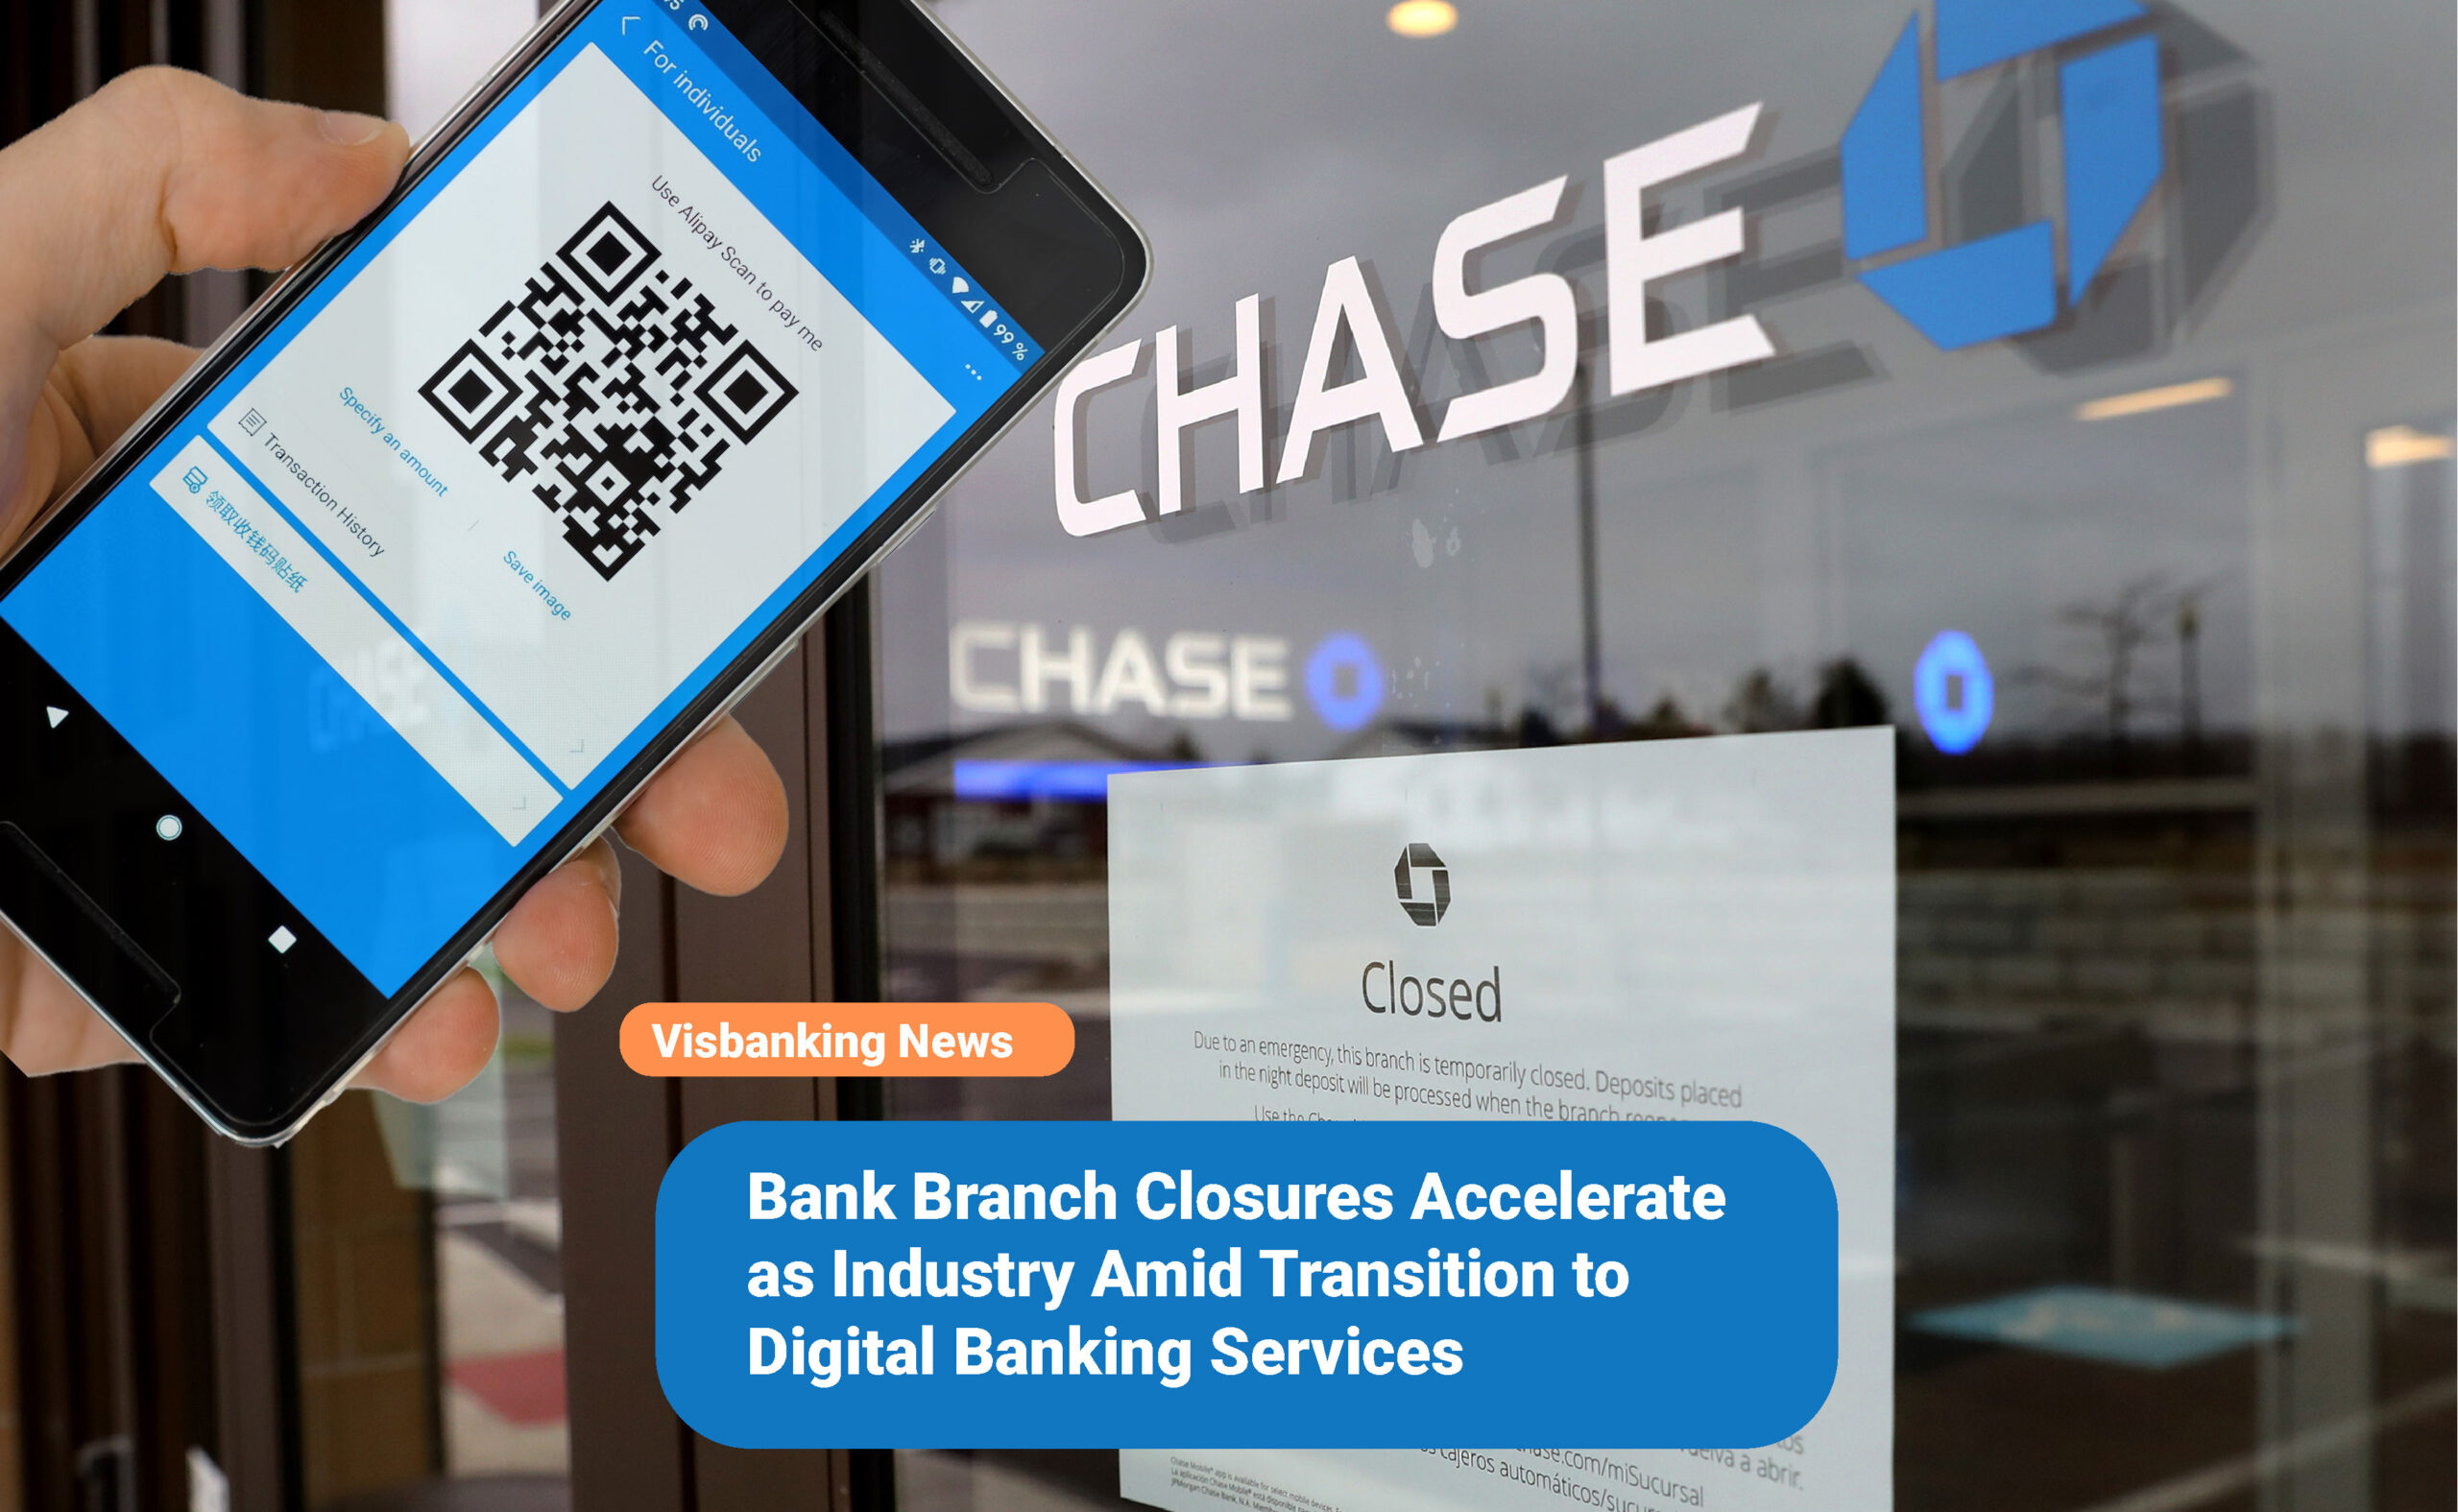 Bank Branch Closures Accelerate as Industry Amid Transition to Digital Banking Services